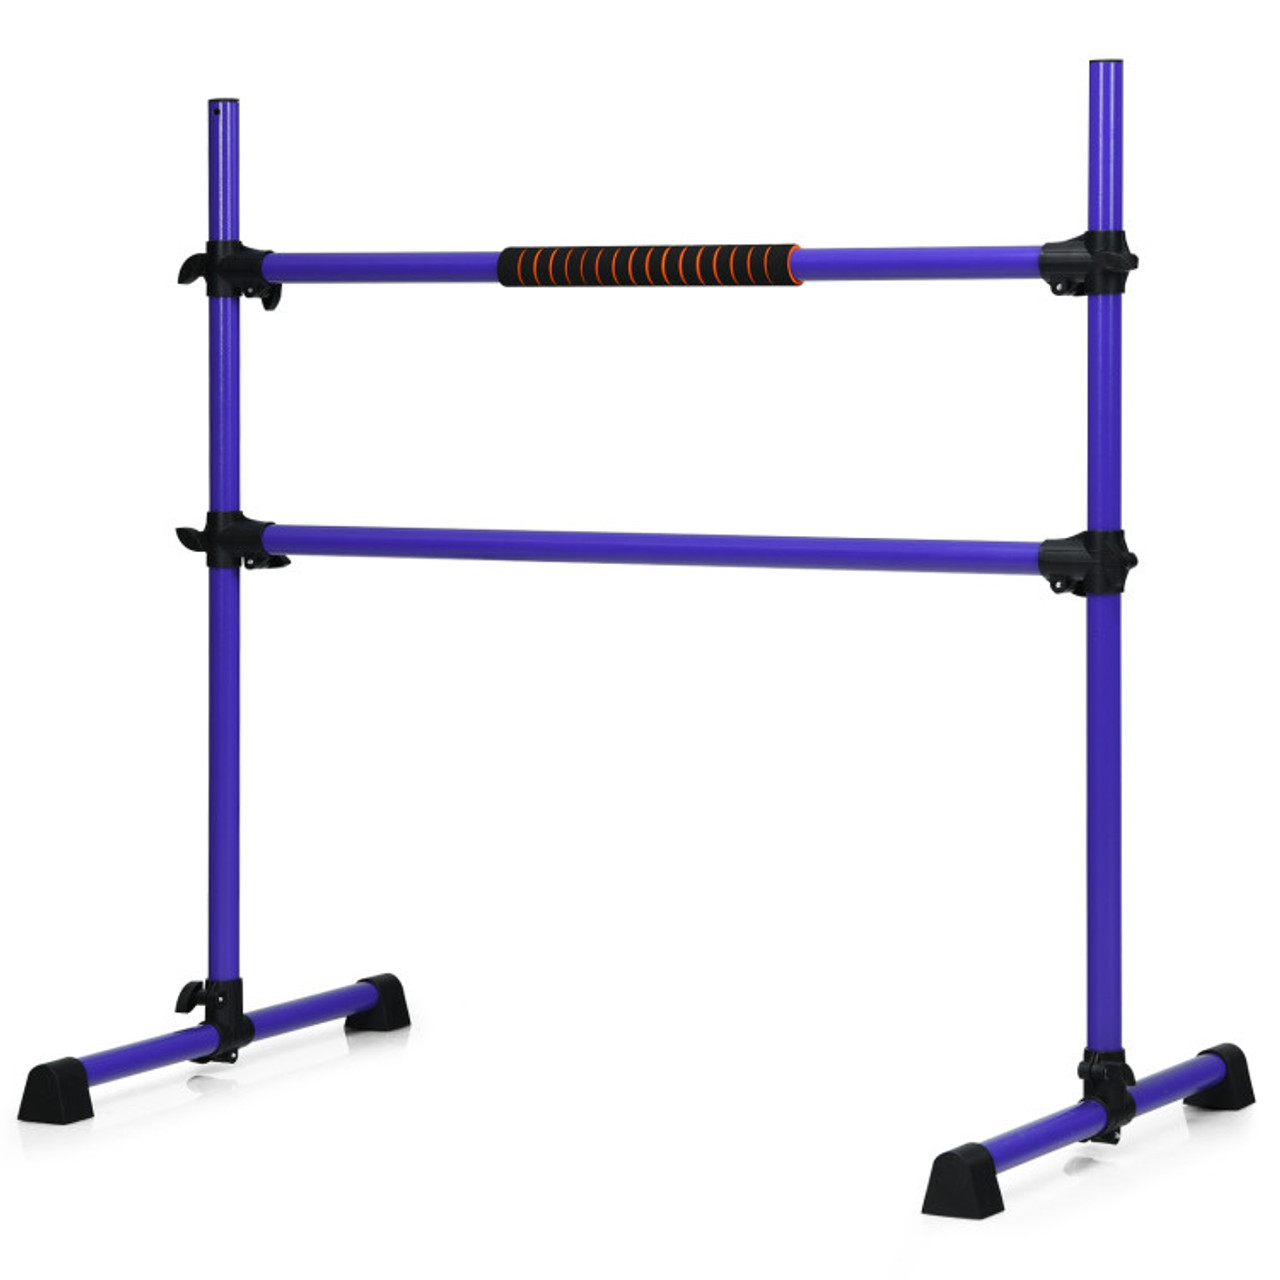 4-Foot Portable Ballet Barre with Adjustable Height product image